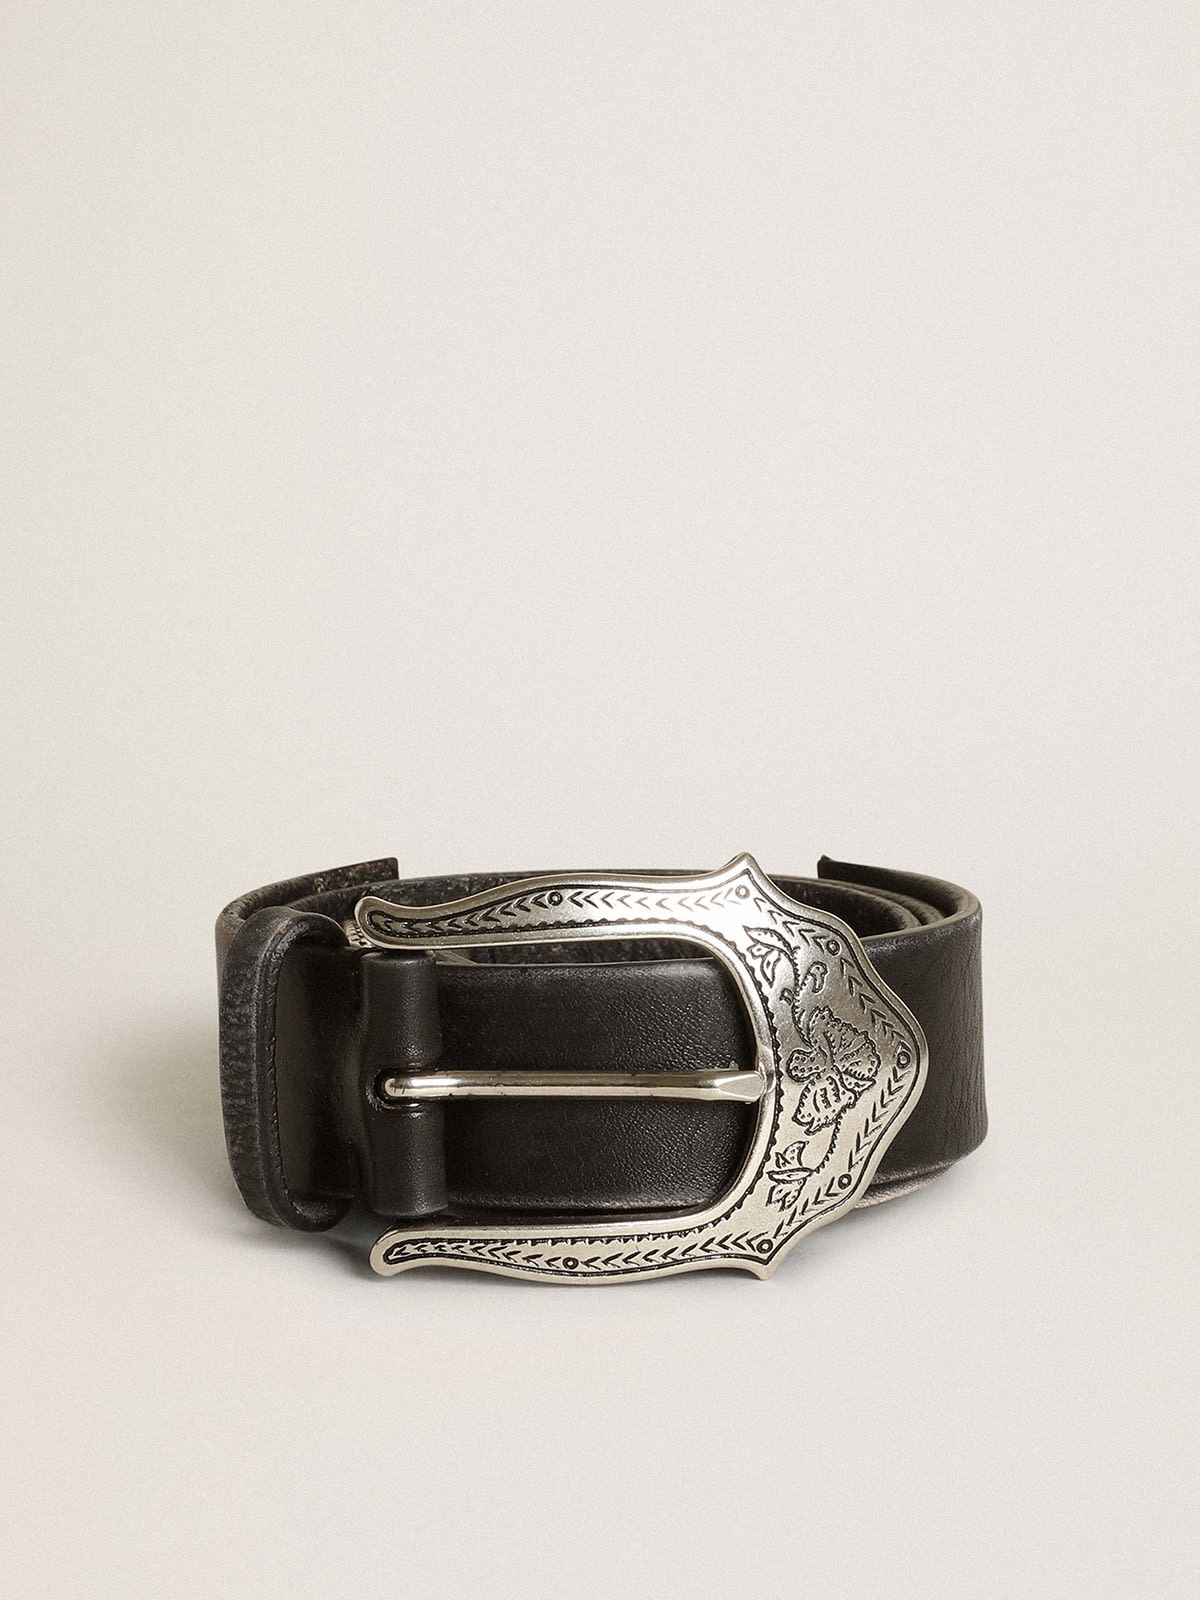 Women's belt in black leather with silver decorations - 1